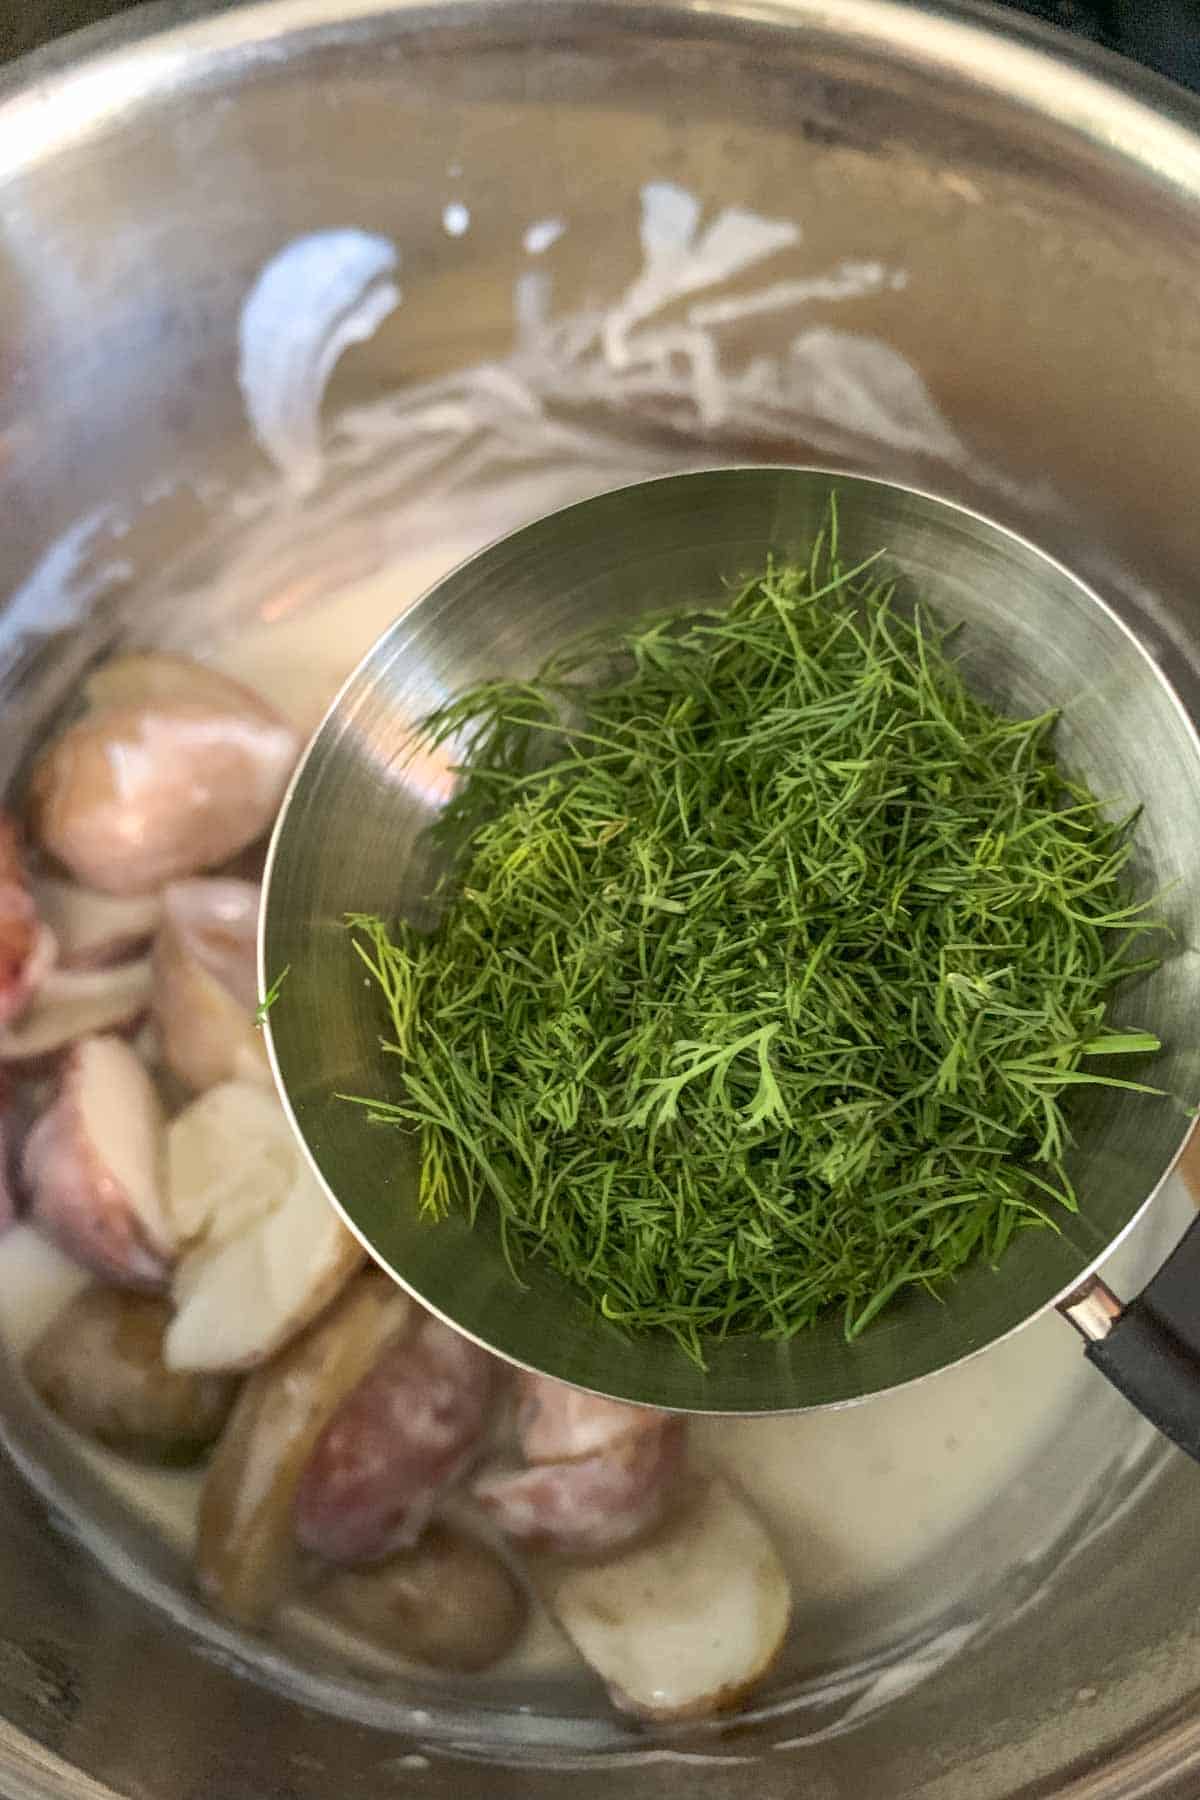 Dill being added to potatoes and cream sauce.